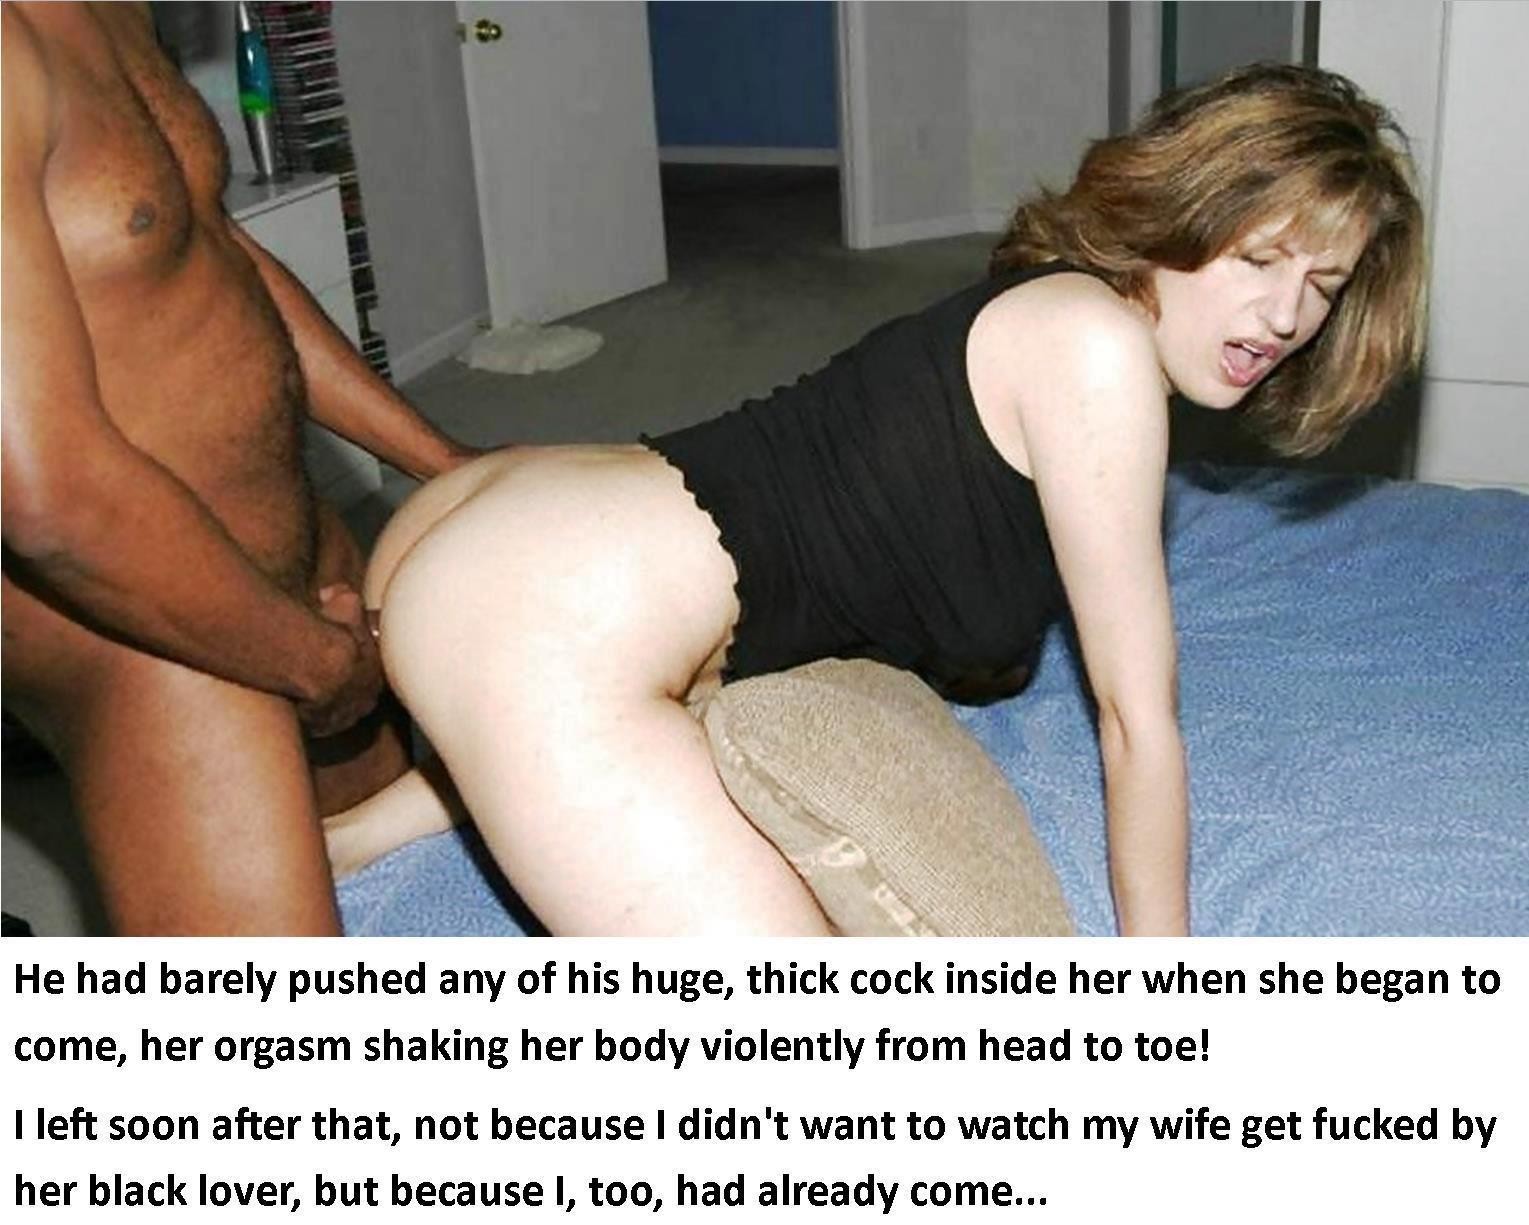 Cuckold Couples Stories